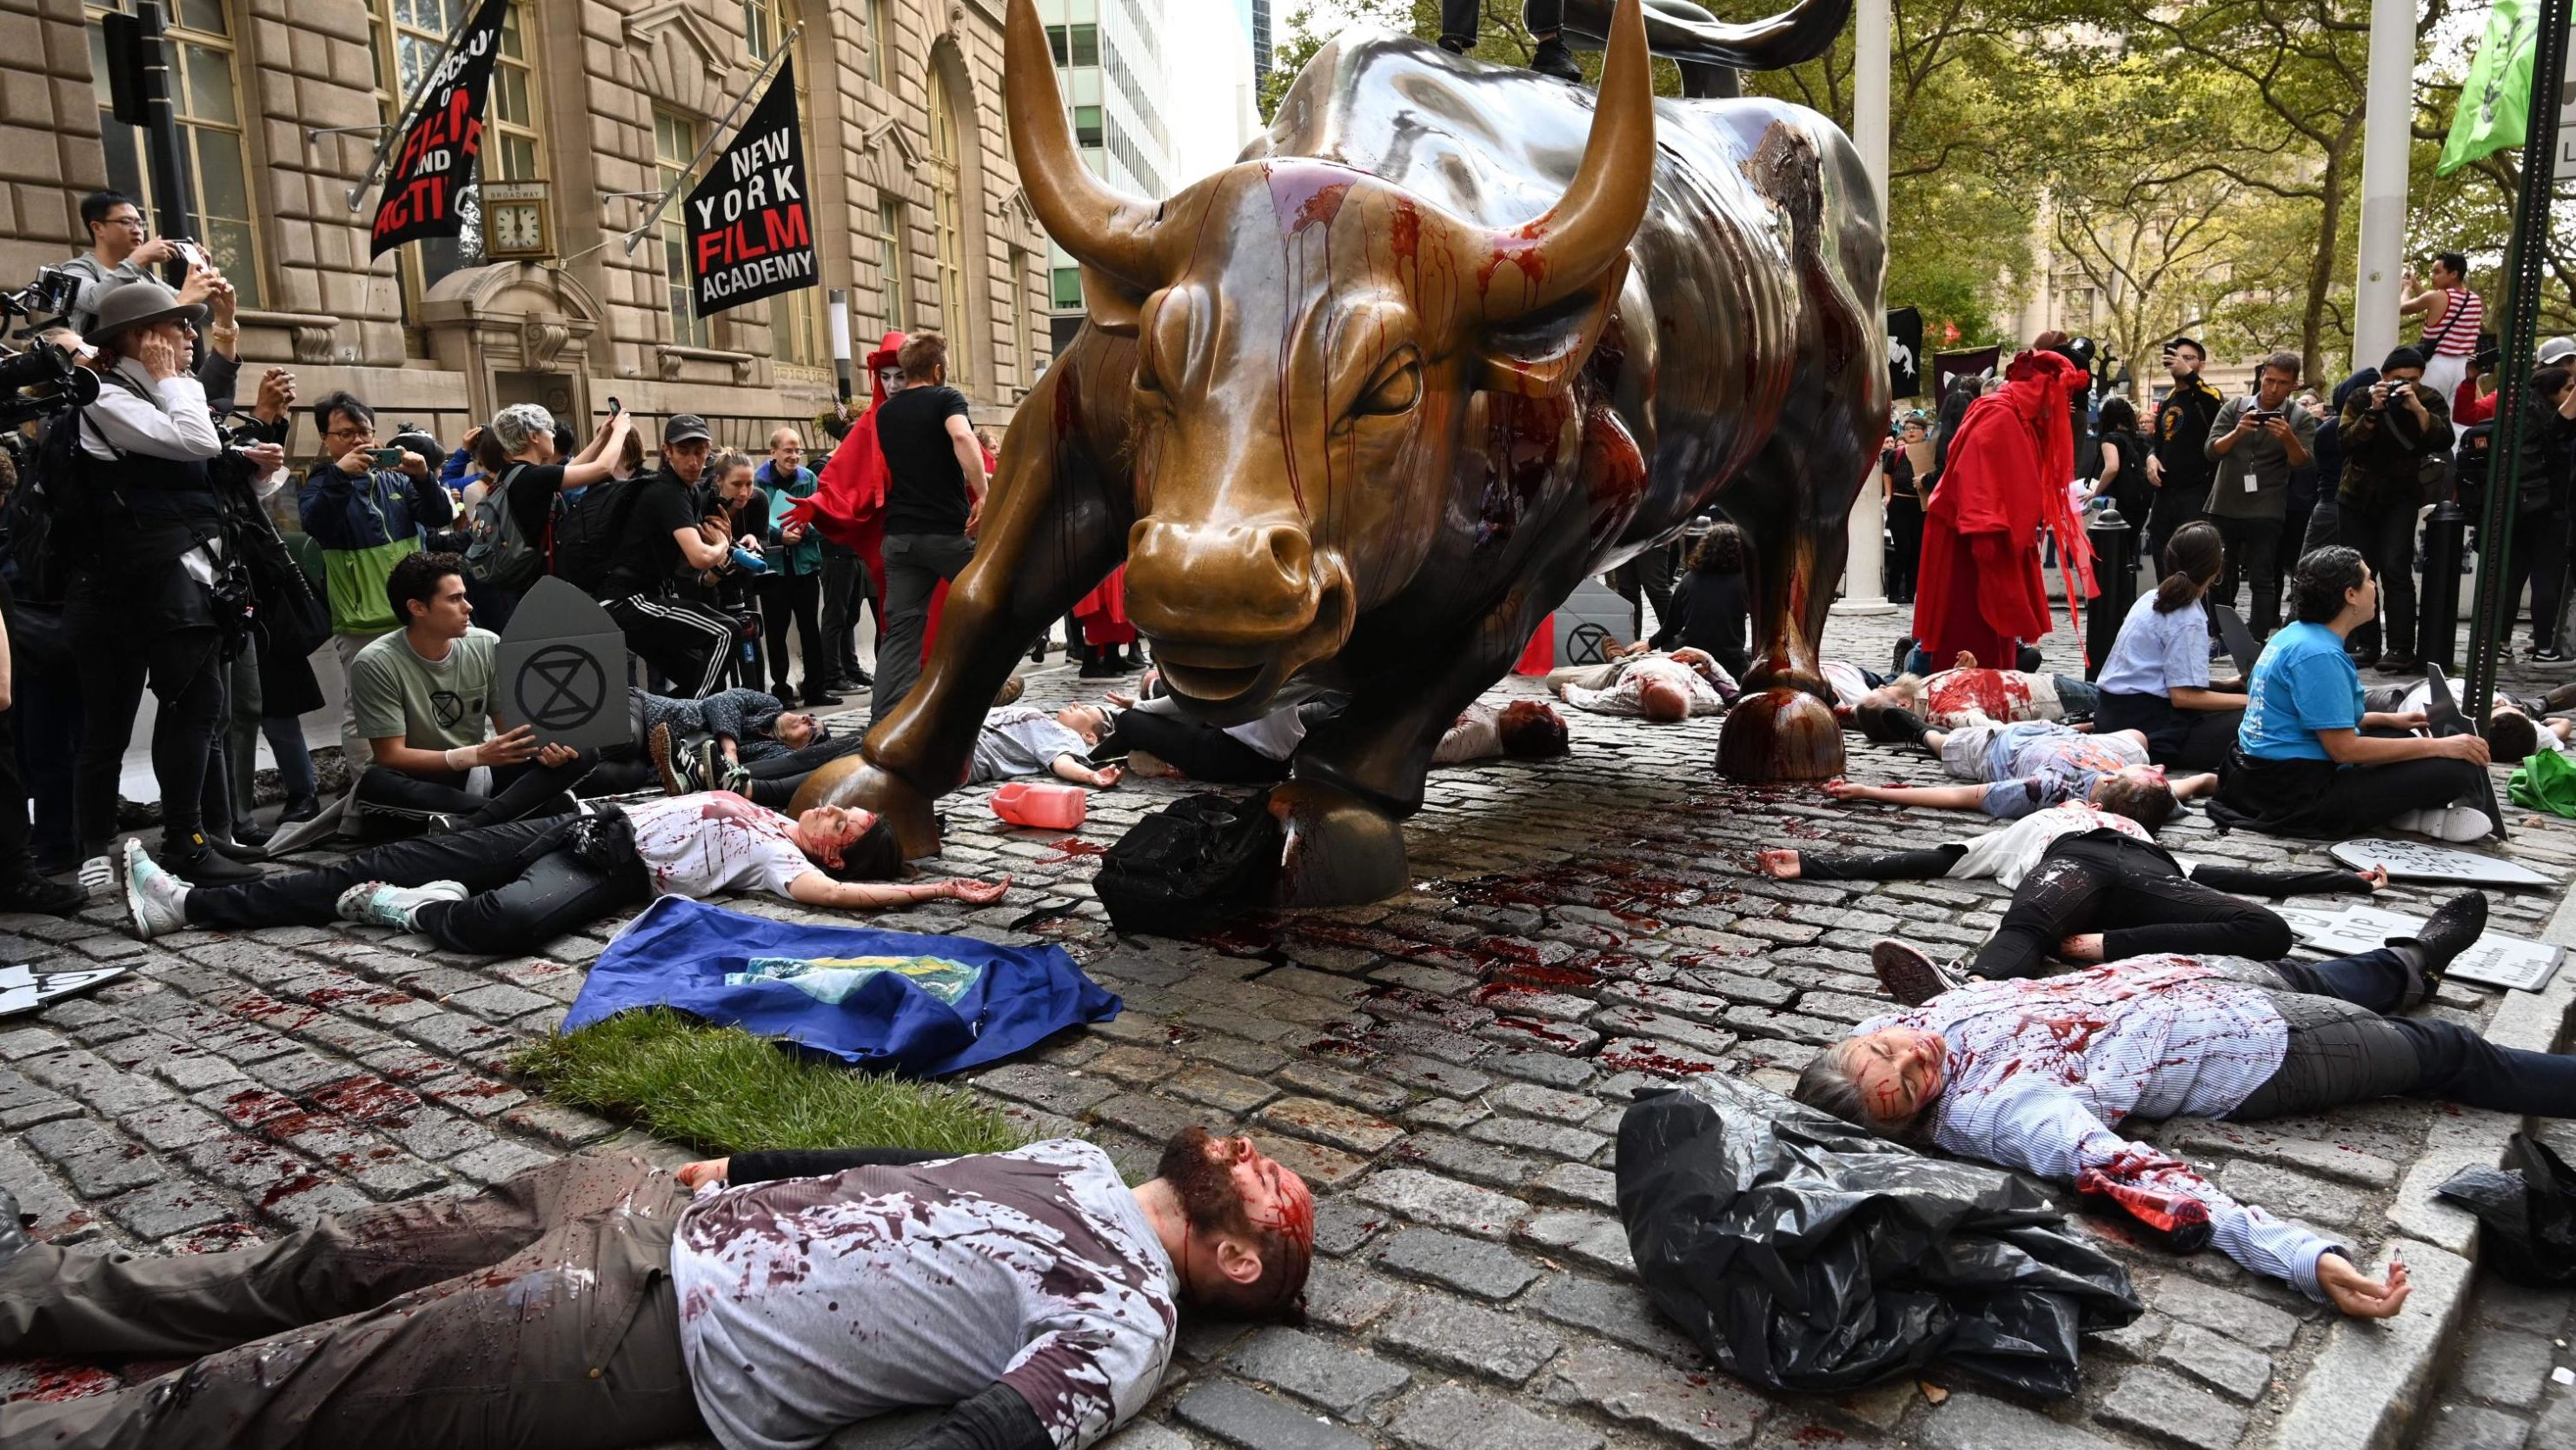 In New York, demonstrators congregate at Washington Square Park as they launched actions around the city on October 7. The protests included pouring fake blood over Wall Street's Charging Bull statue.